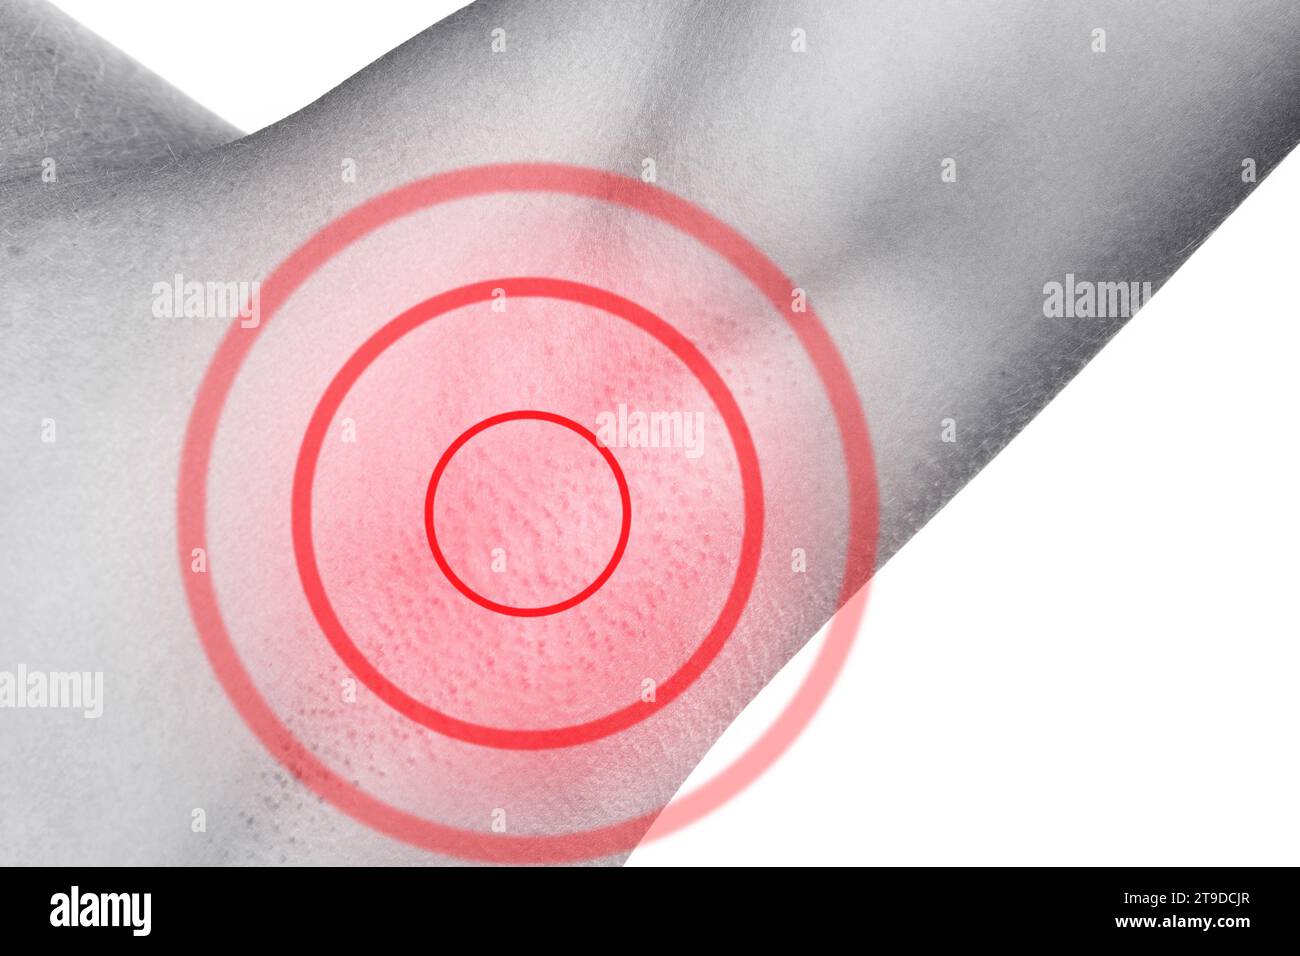 Closeup of female armpit with redness. Skin irritation or swollen lymph node. Stock Photo